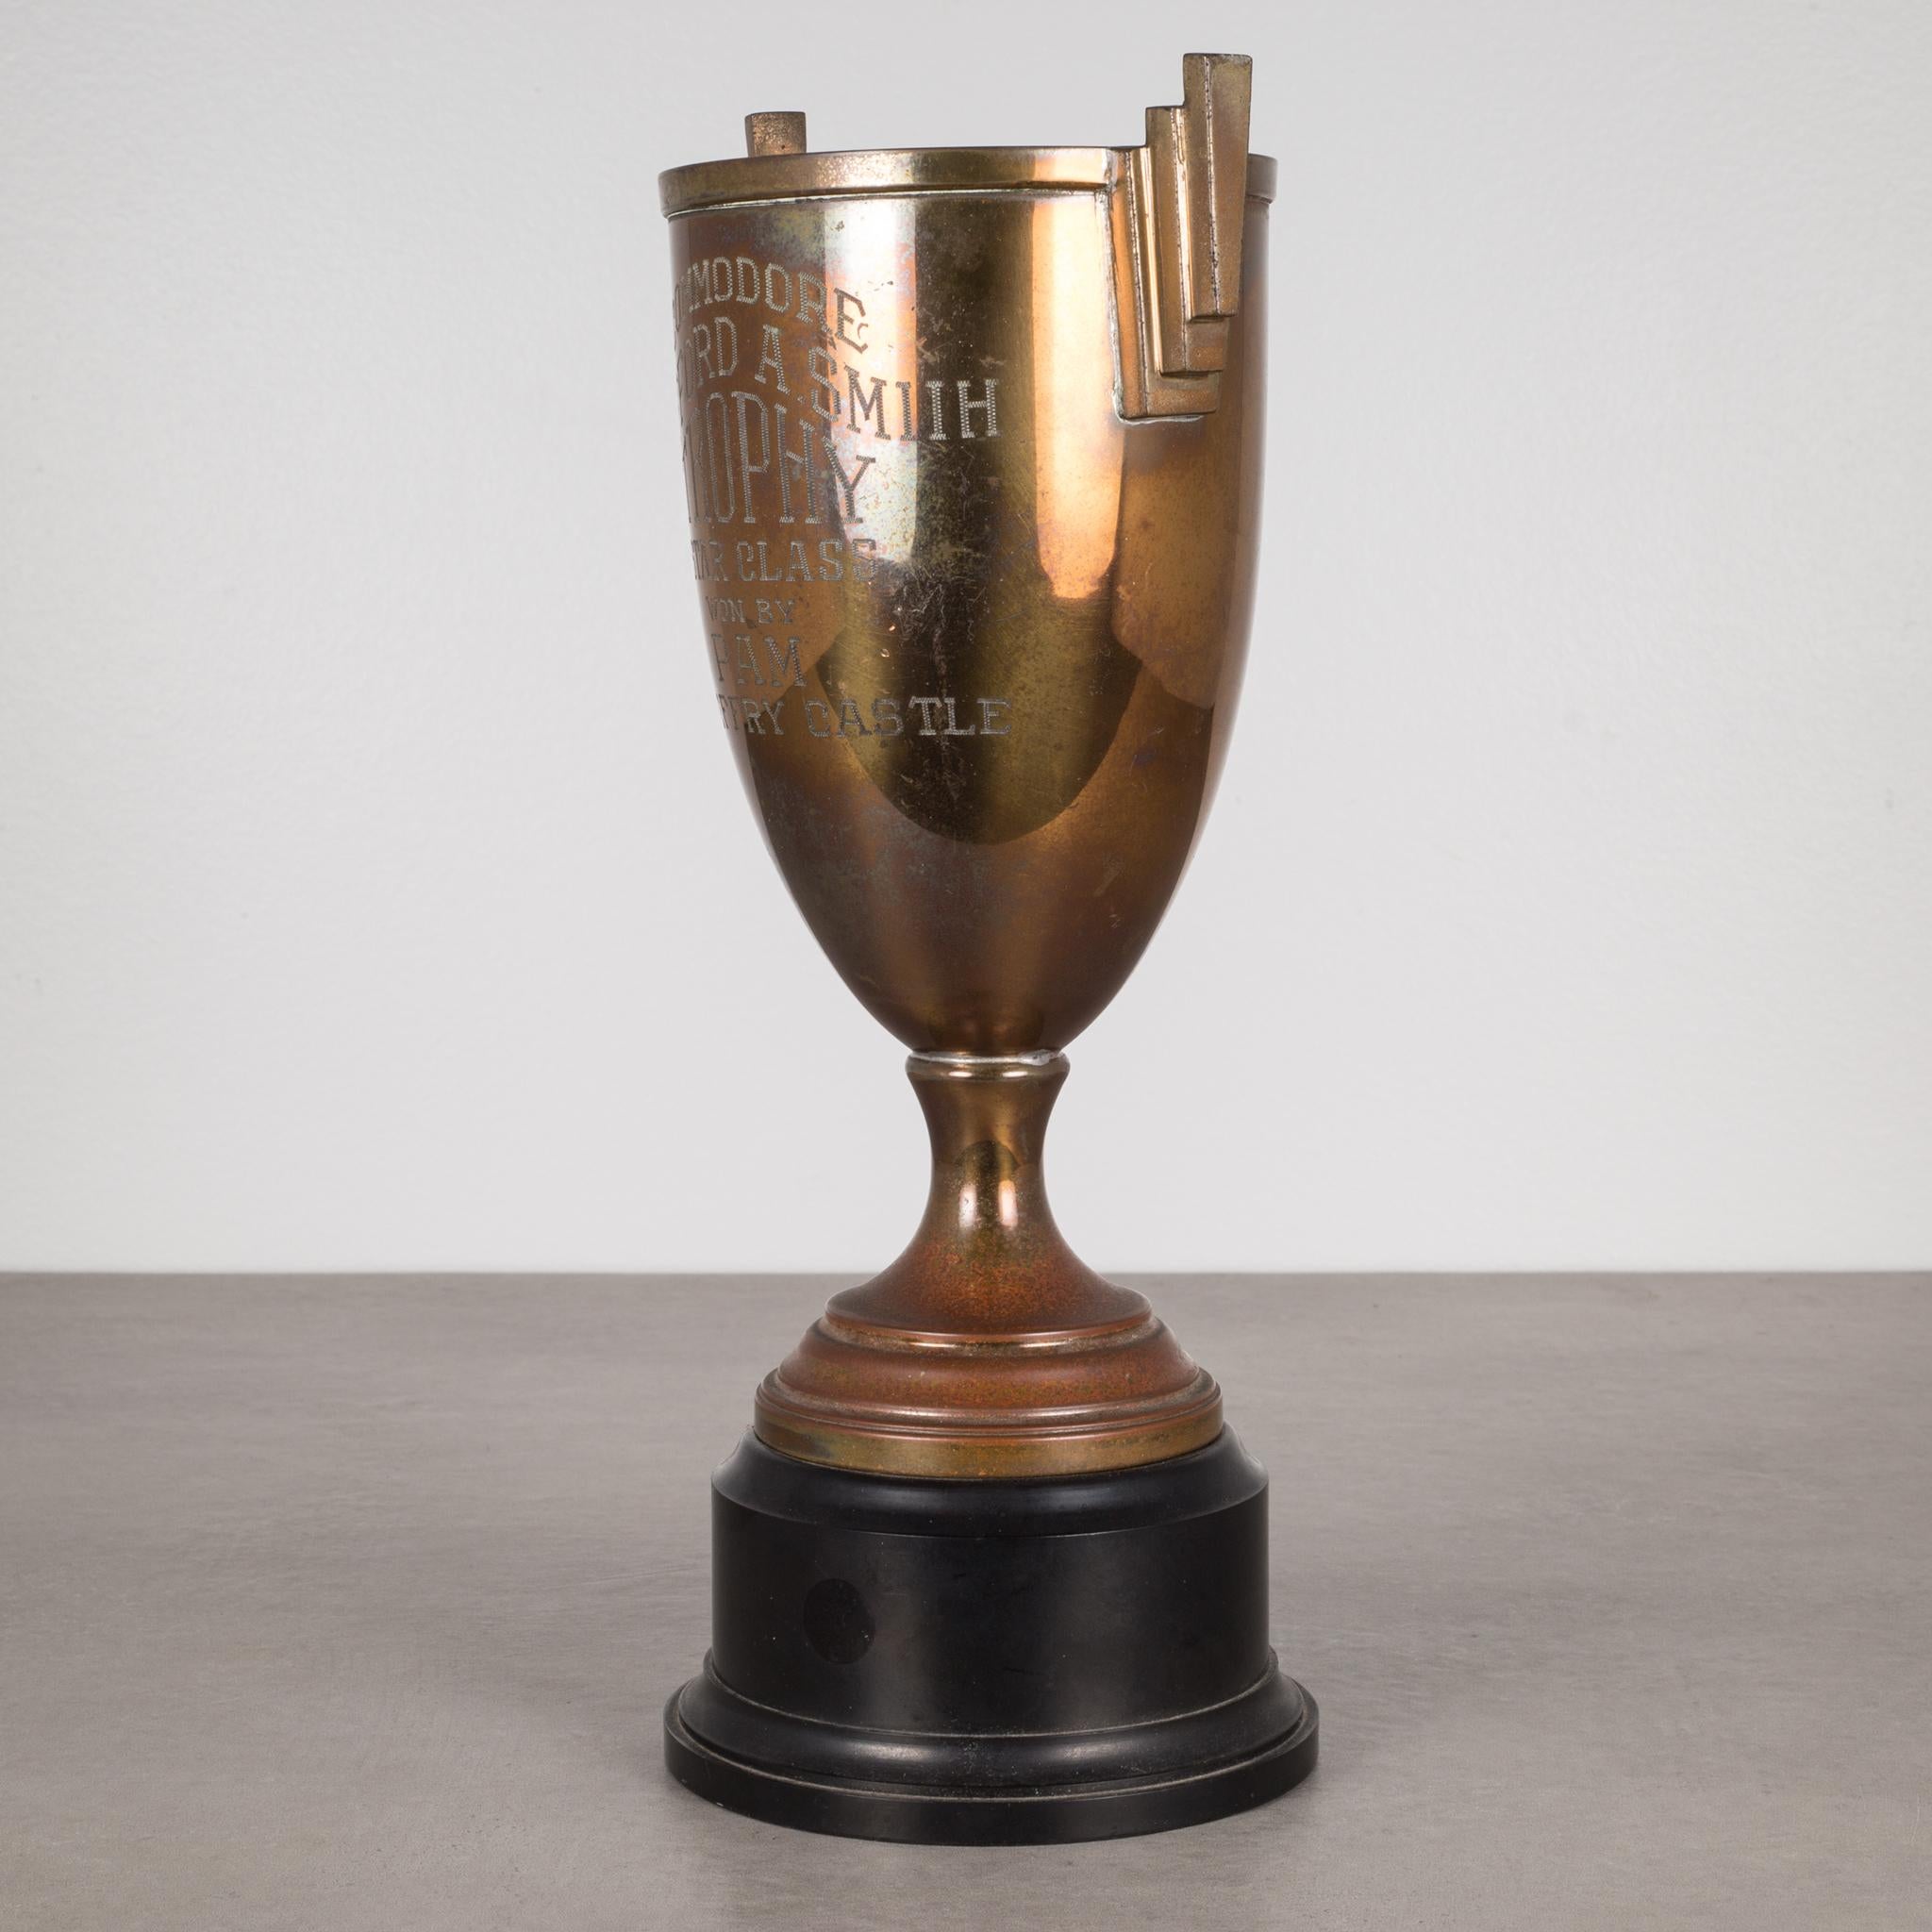 ABOUT

This is an original Art Deco trophy cup from the San Francisco Yacht Club. It is engraved 